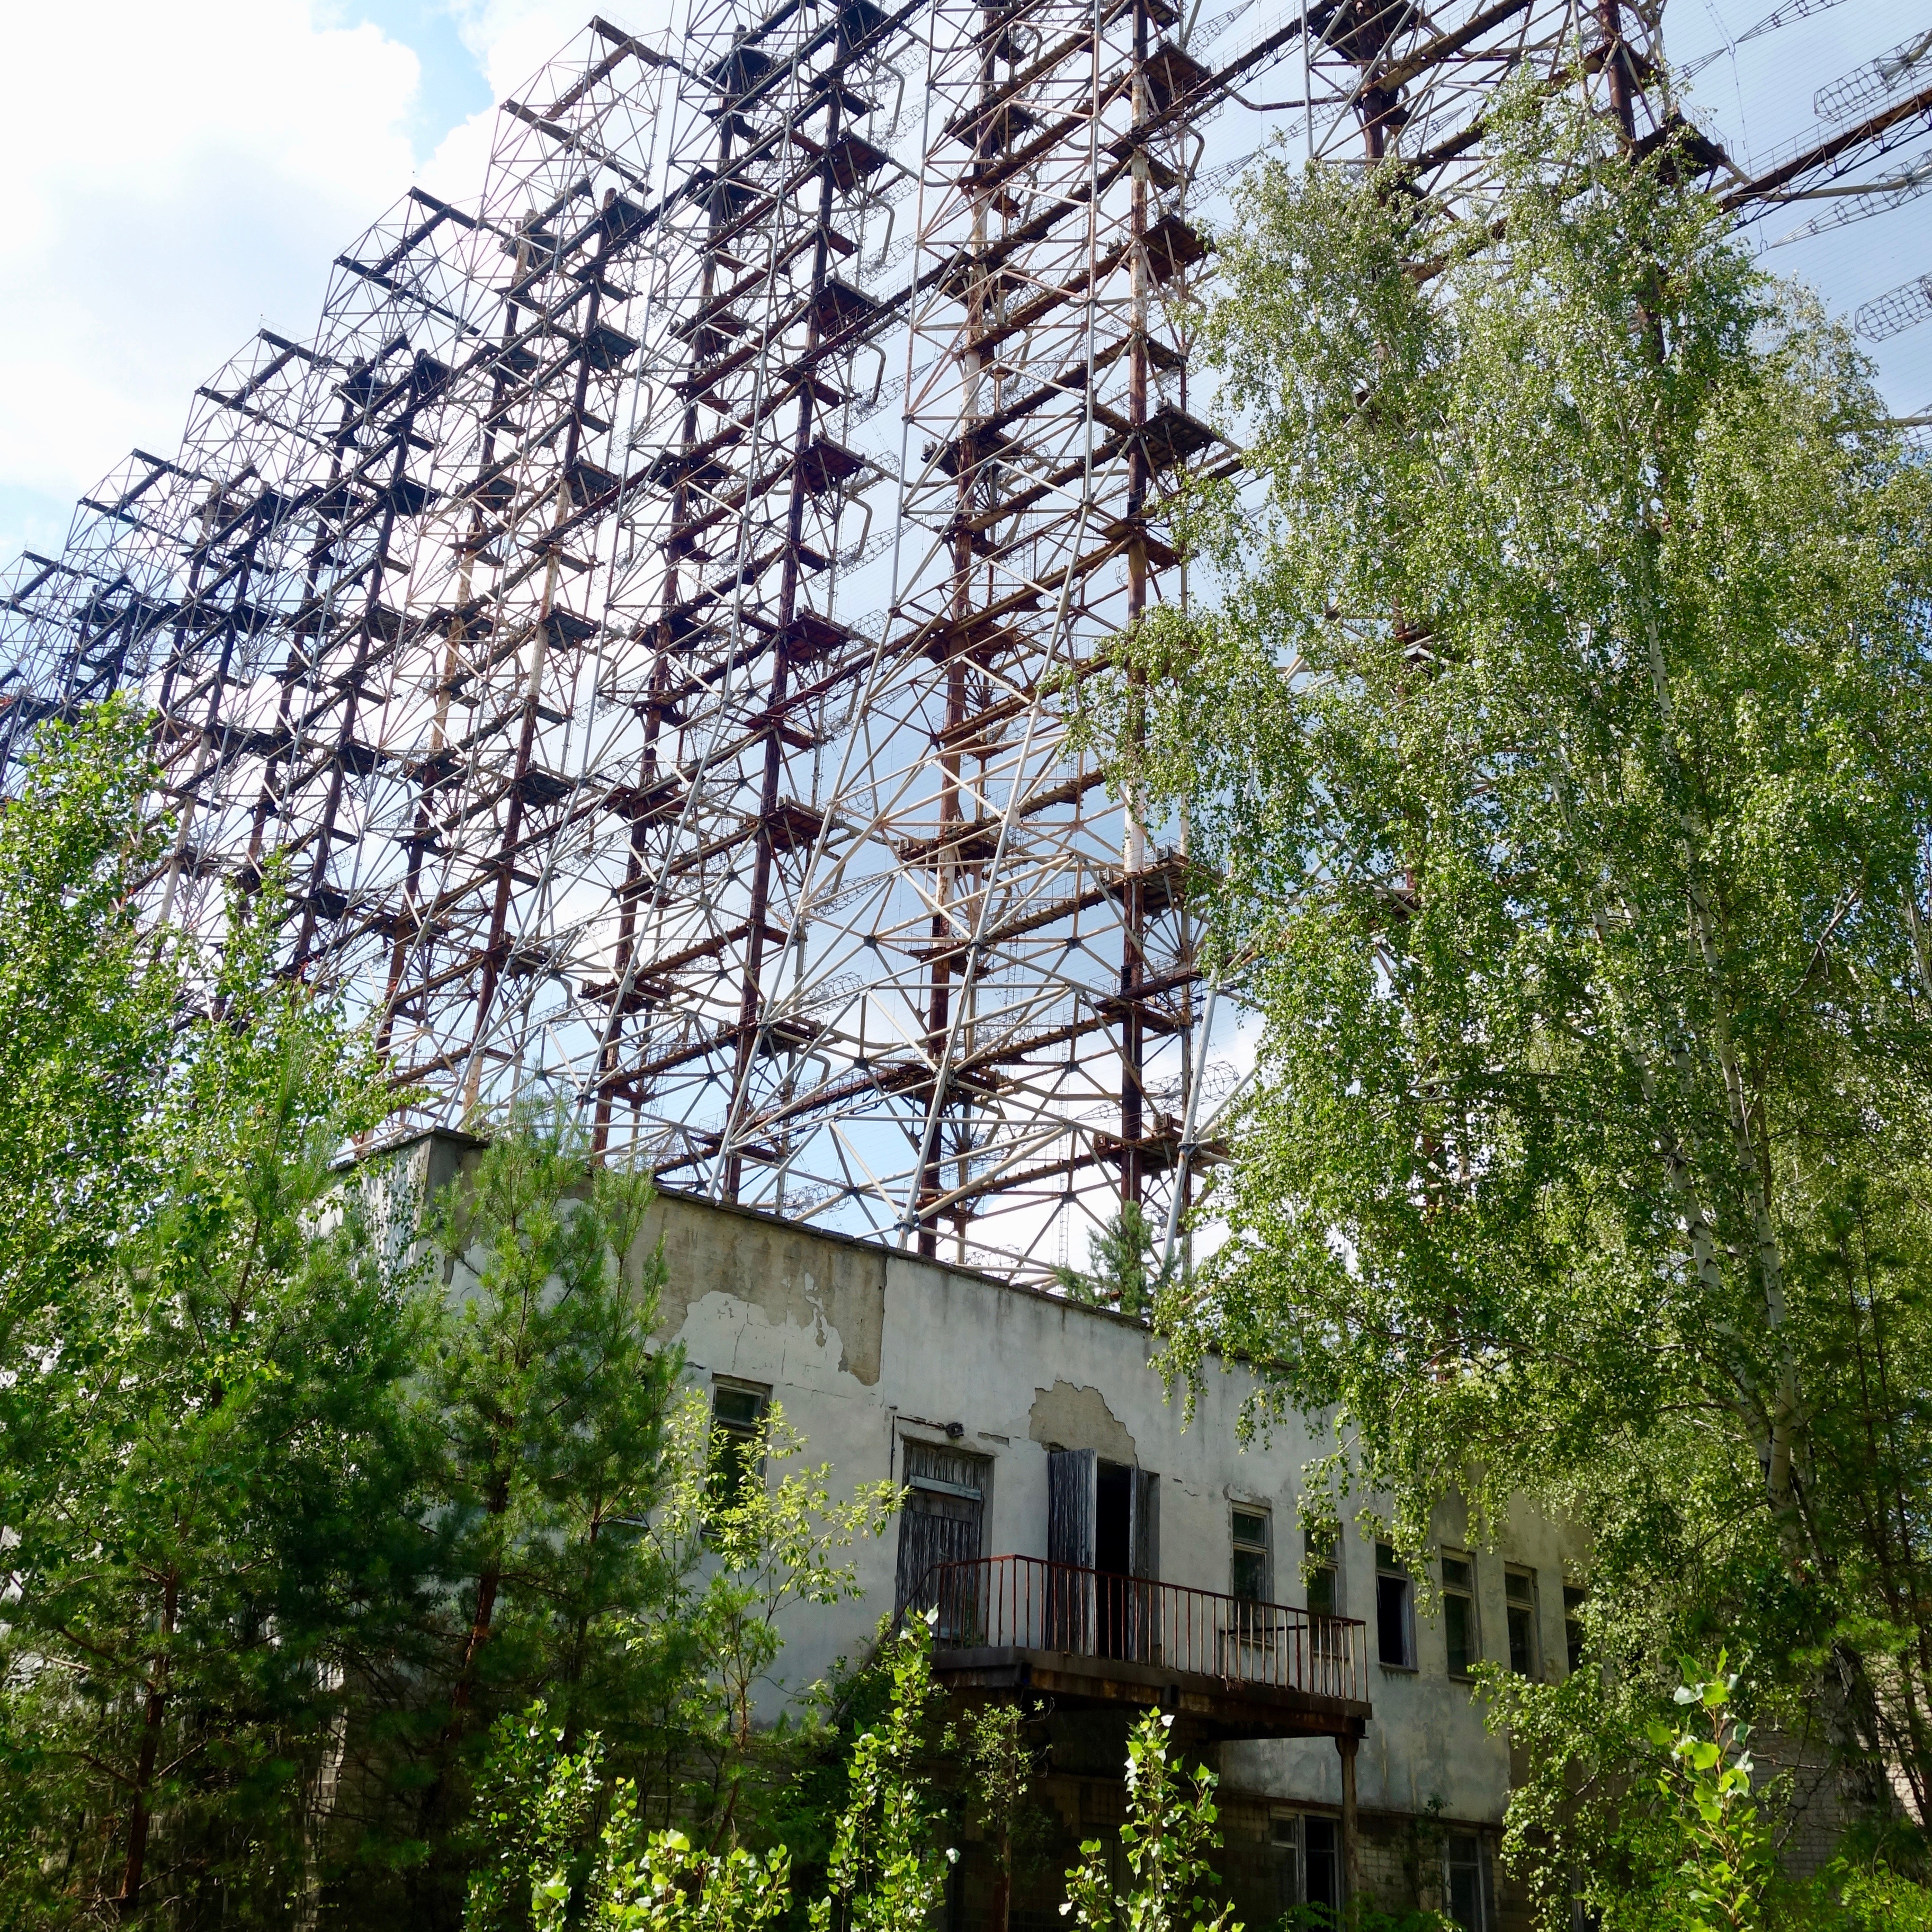 The Russian Woodpecker was a giant structure of metal attennae like structure rising up from a pine tree forest only a few miles from the Chernobyl Reactors.  This shot shows the giant rusted metal structure rising up to the blue sky with green willows amid other smaller green pine trees with reddish brown tree trunks.  